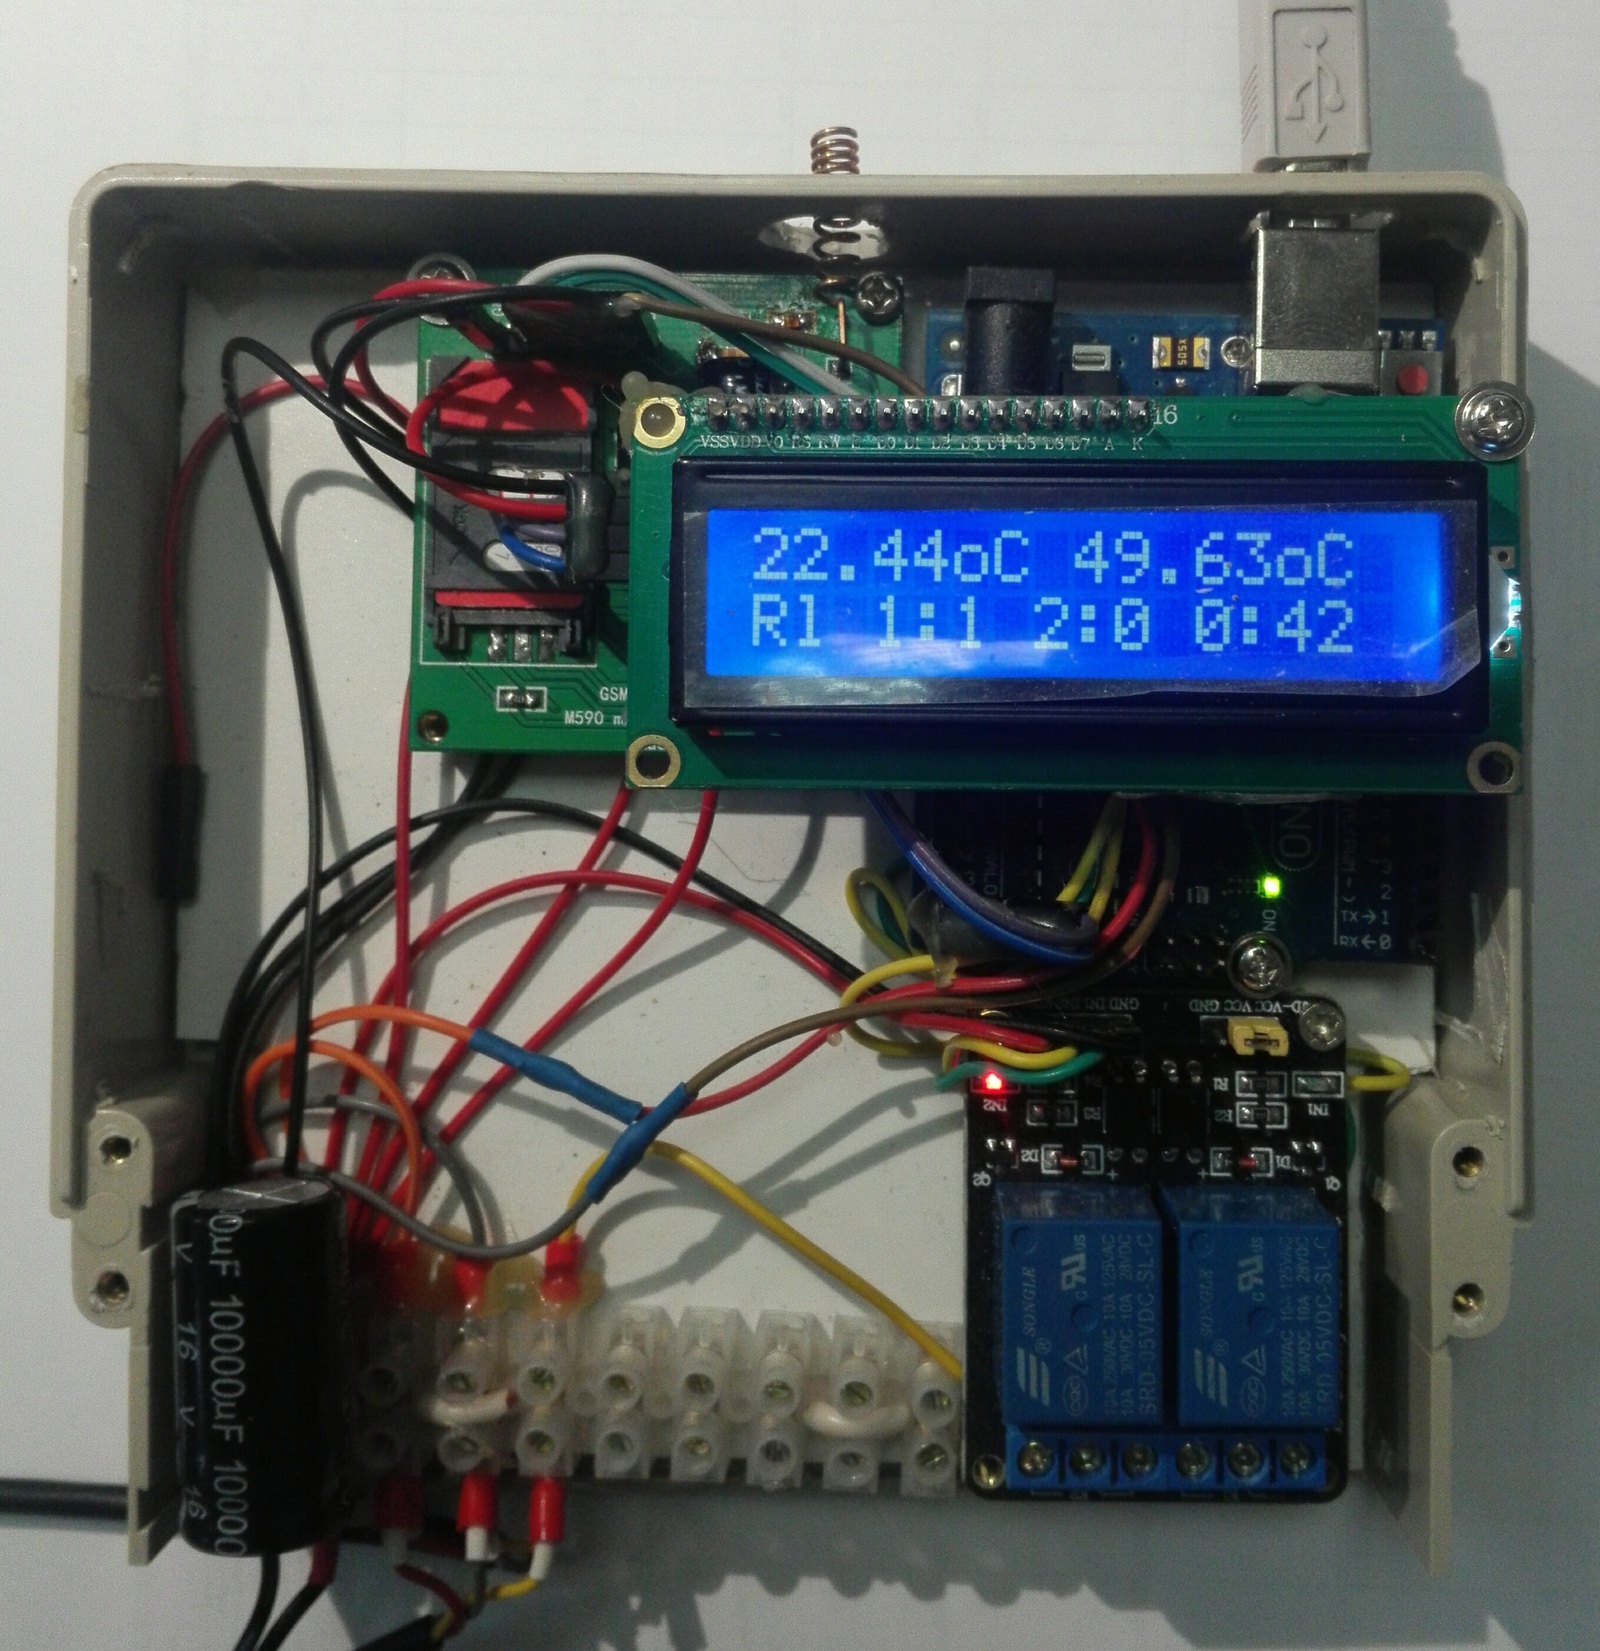 Heating control in the country house via GSM - My, , , Gsm, Longpost, Arduino